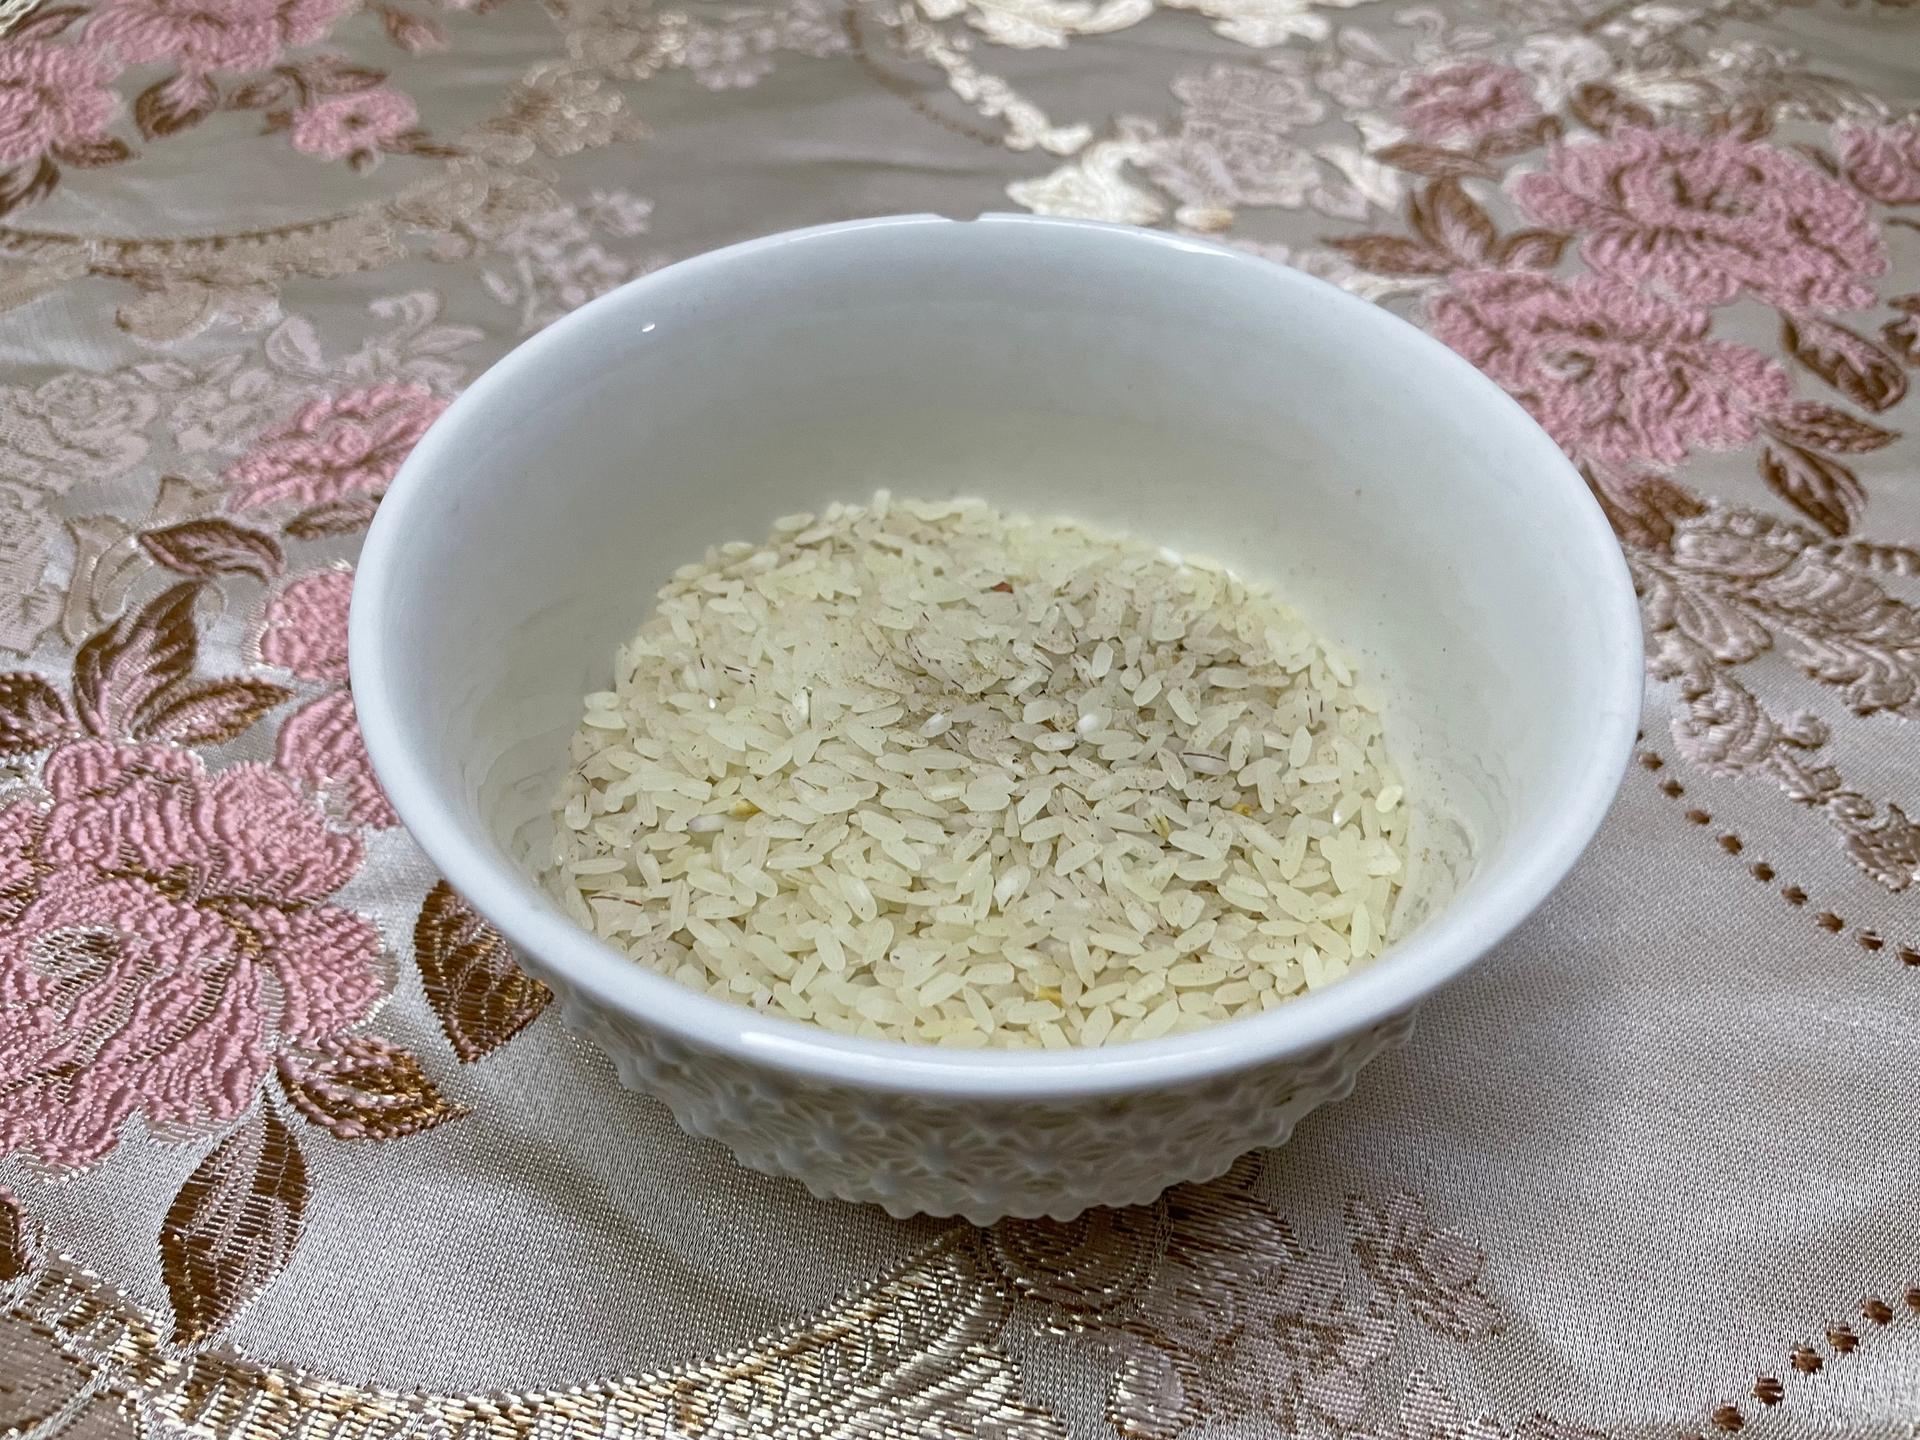 Anbar rice discoloring after a couple of years. The price of what's available now has more than doubled, forcing Iraqis to depend on imported rice, Baghdad, Iraq, Sept. 1, 2023.